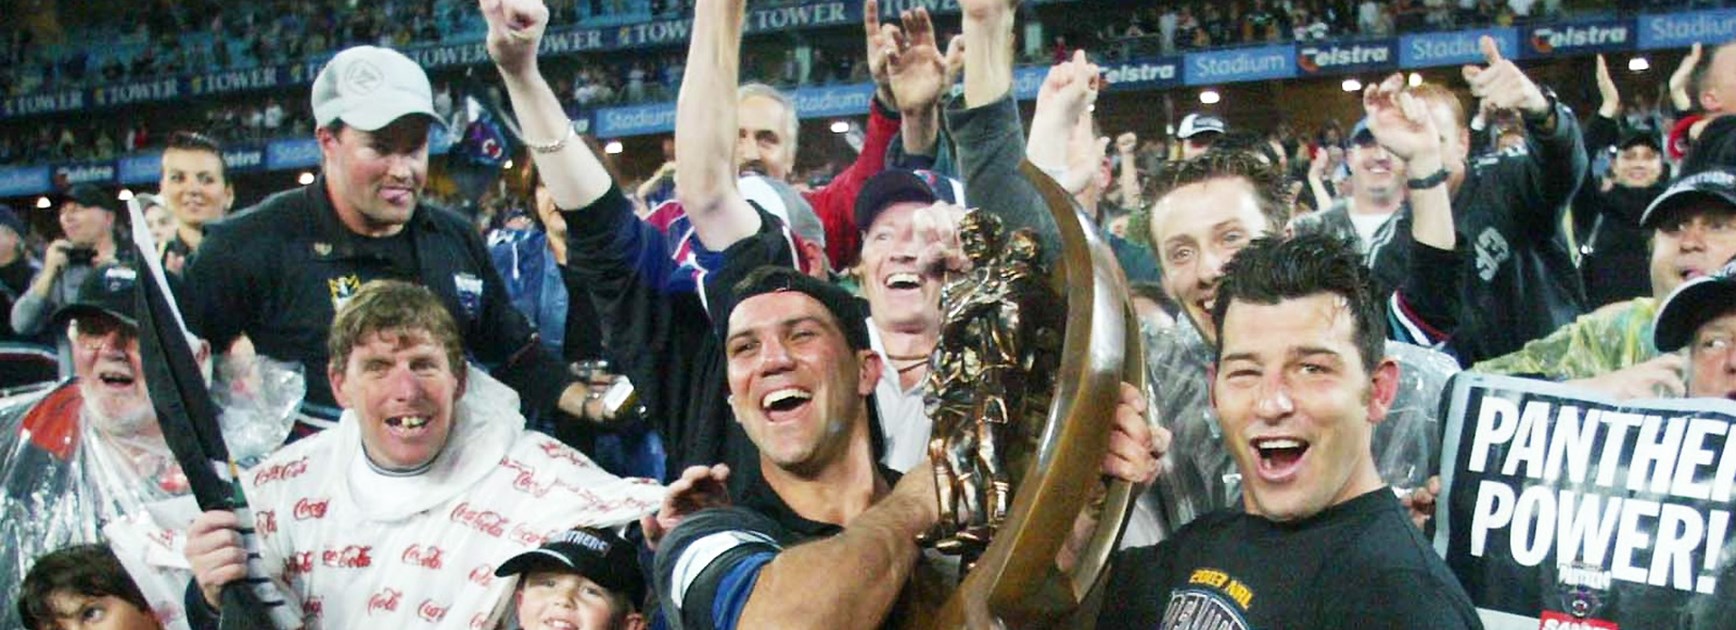 Scott Sattler celebrates winning the 2003 Grand Final with Craig Gower and Penrith fans.